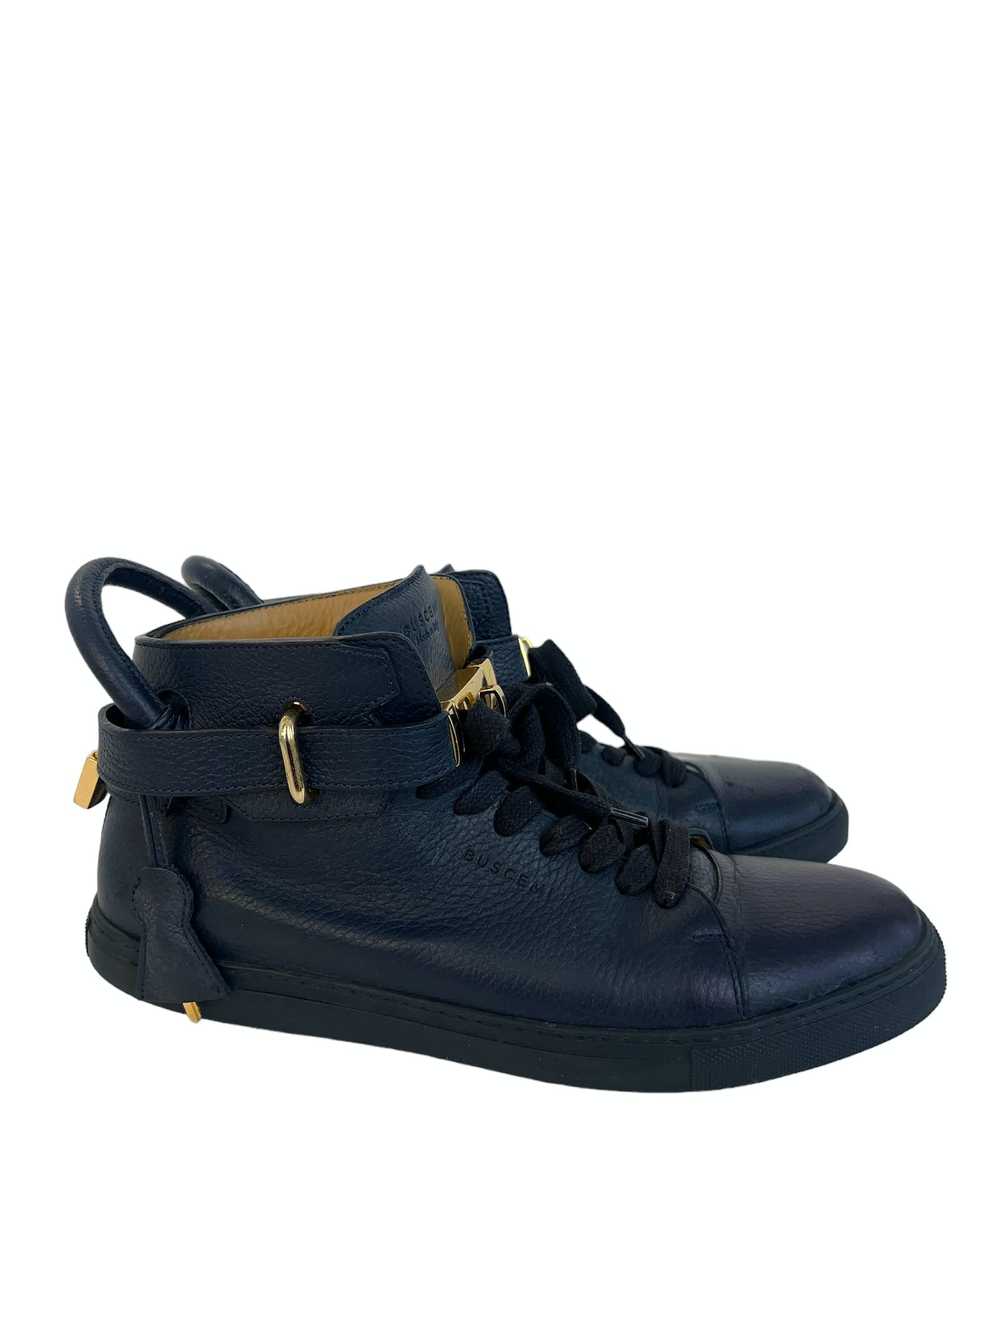 Buscemi Buscemi 100 mm high tops sneakers - image 3